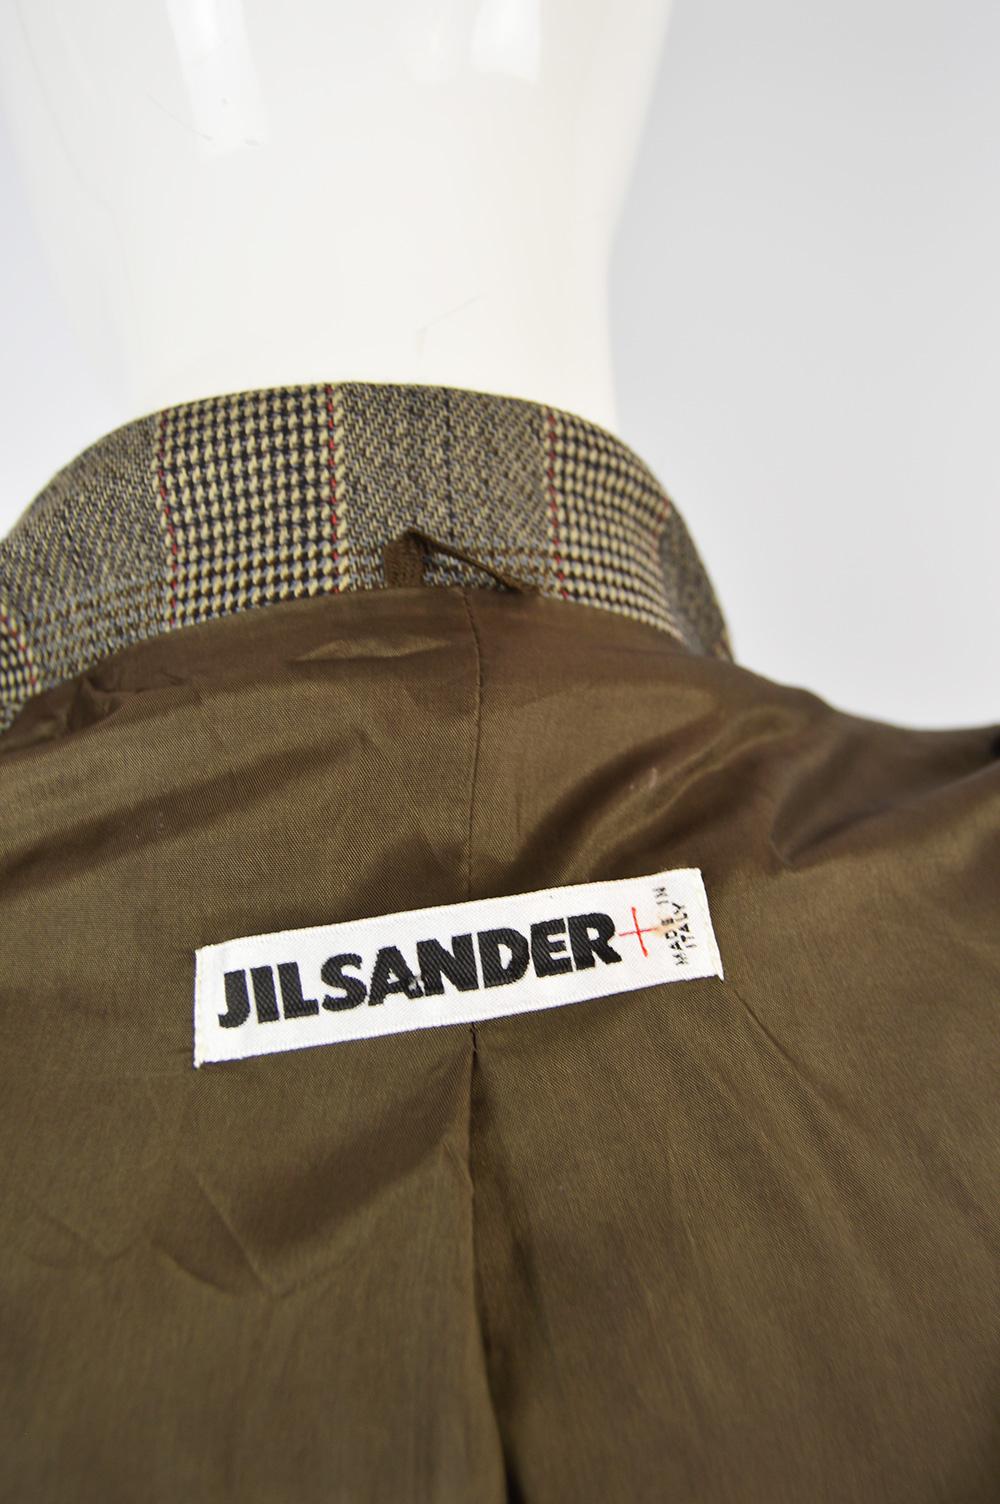 Jil Sander Pure Wool Double Breasted Tailored Women's Vintage Skirt Suit , 1990s 3